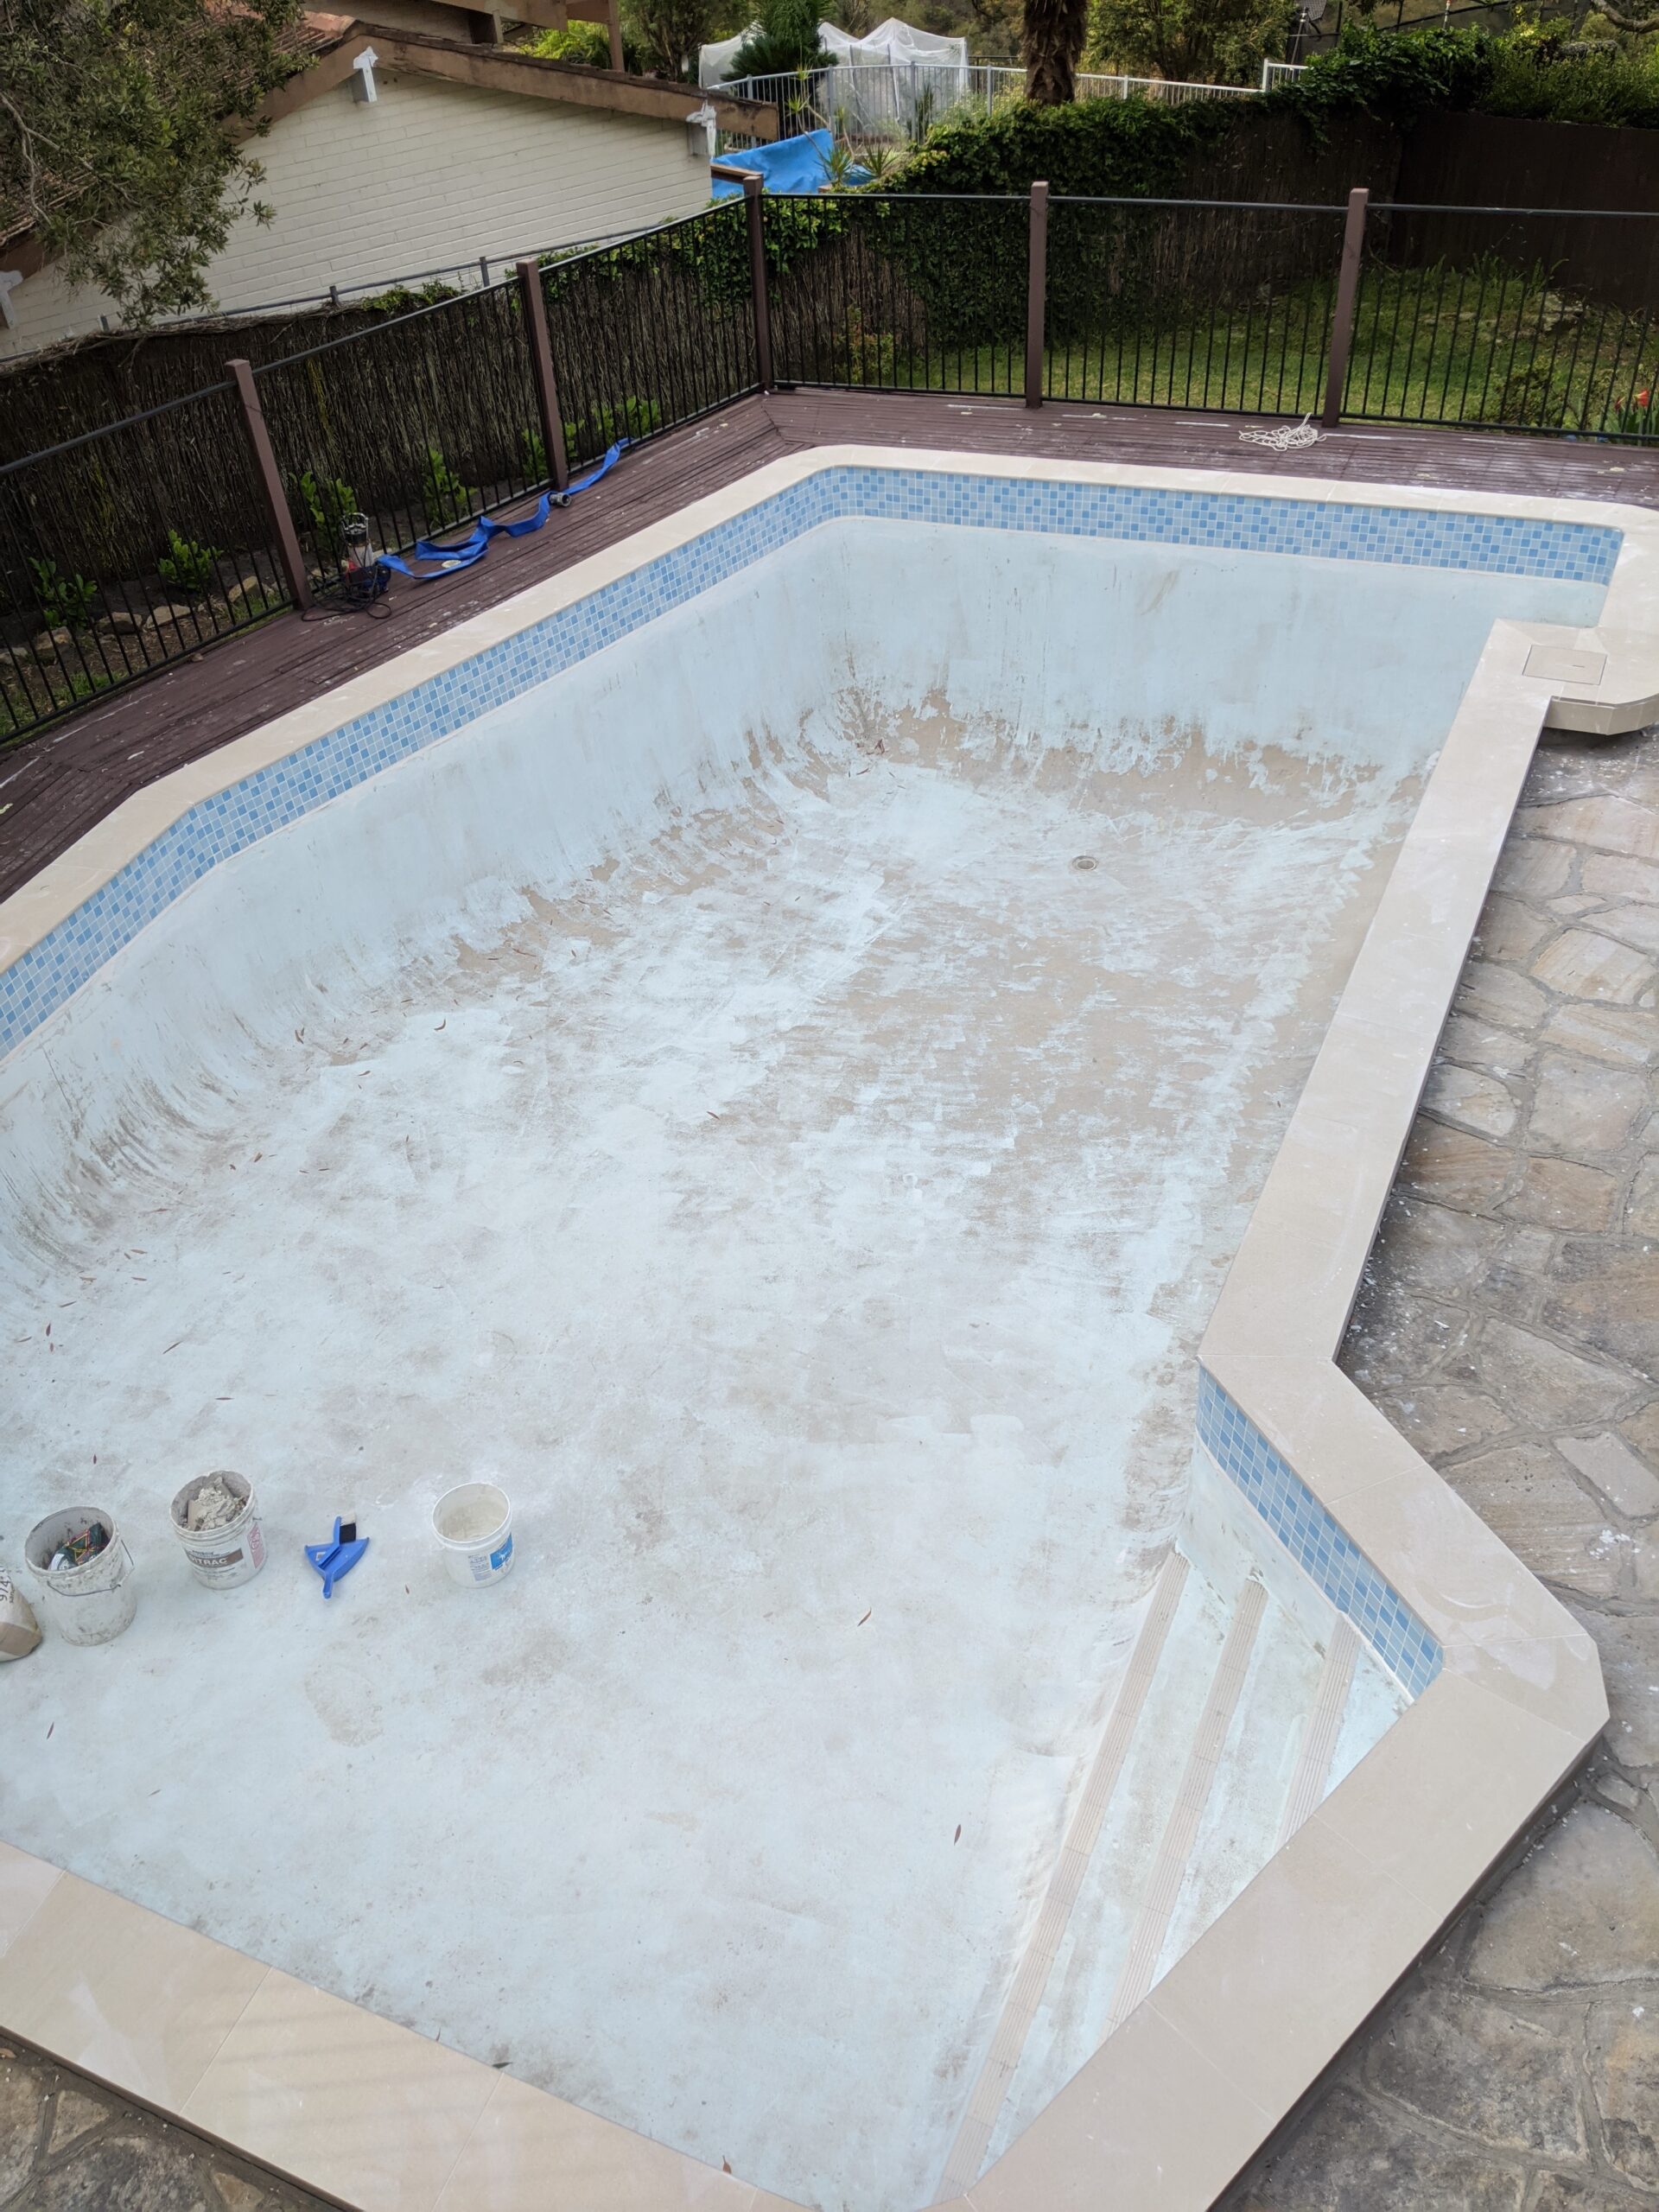 How To Paint Your Pool A Practical Diy How To Guide For Pool Painting